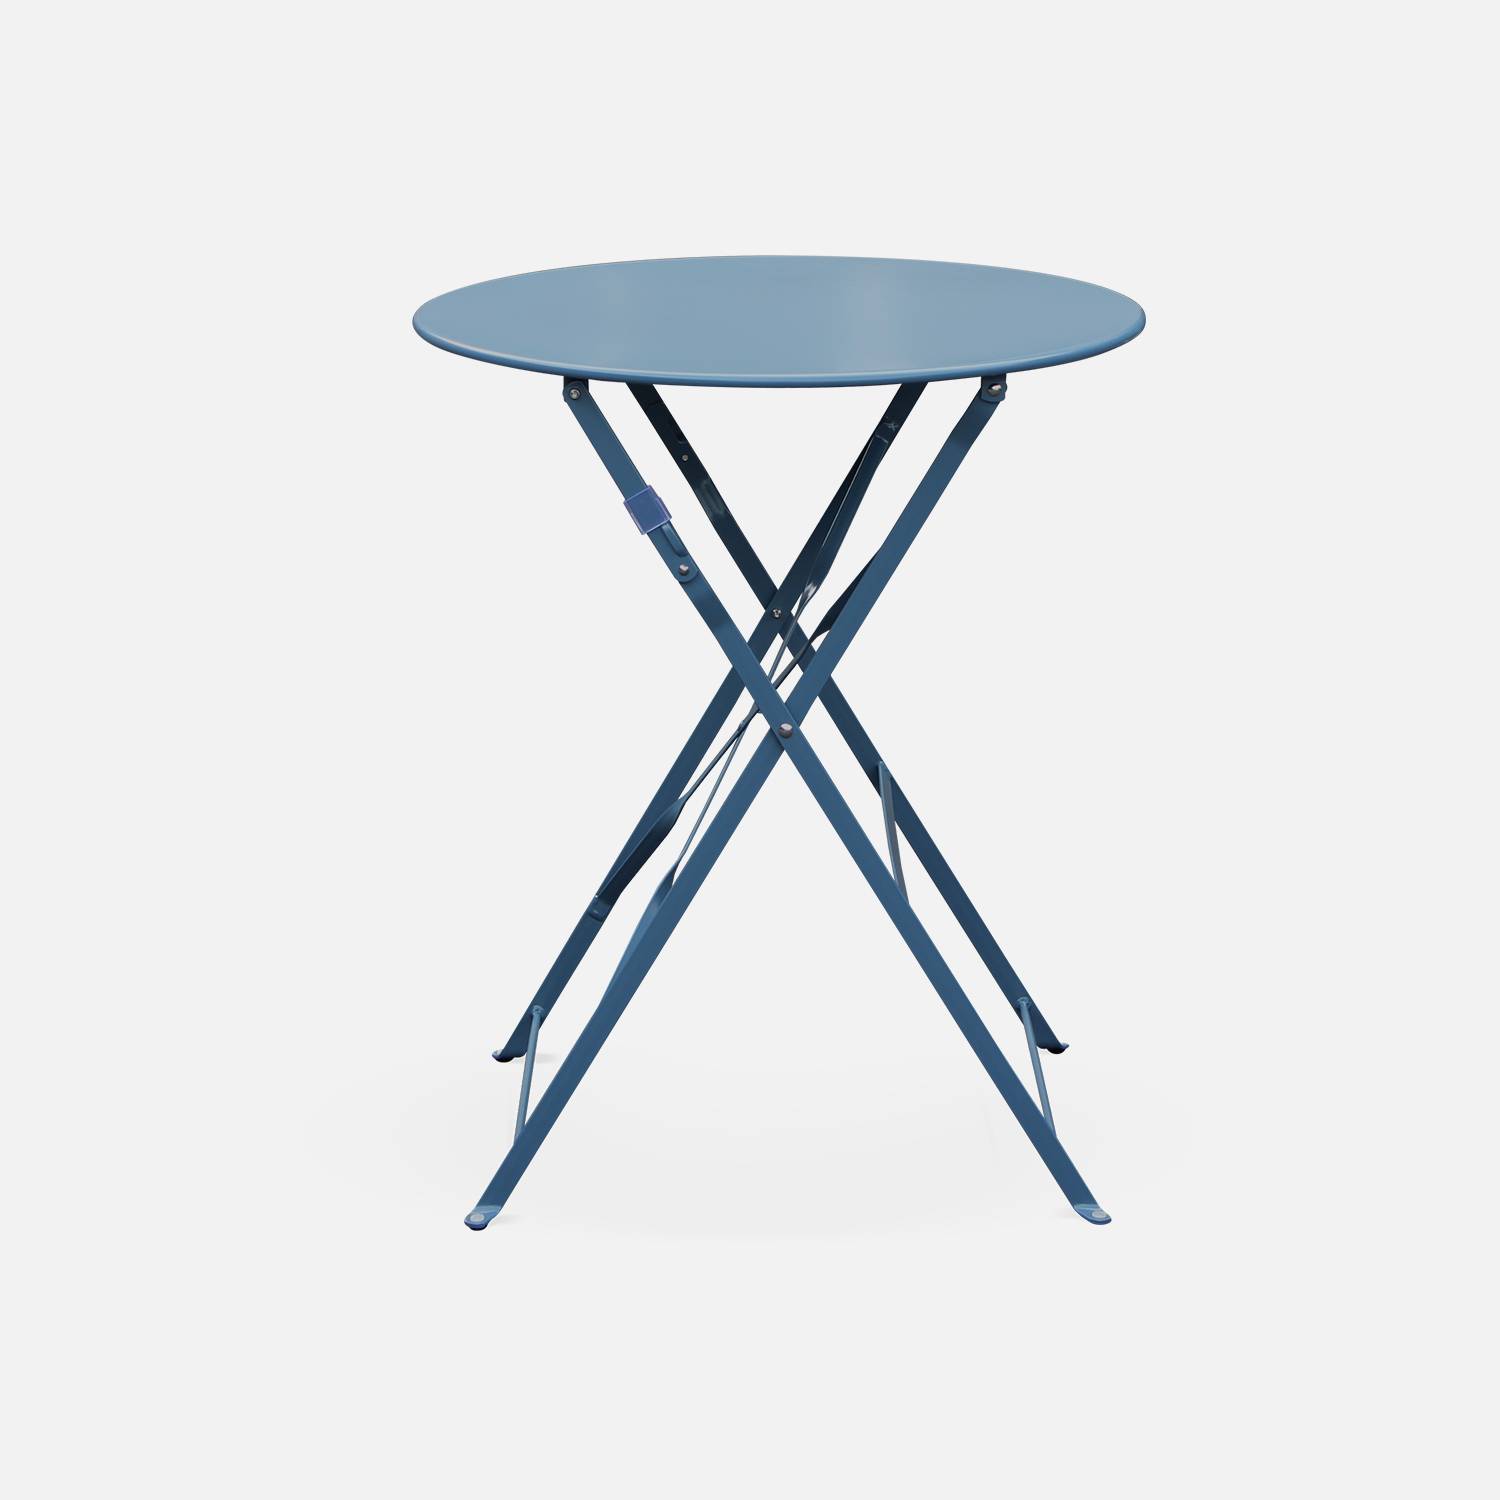 2-seater foldable thermo-lacquered steel bistro garden table with chairs, Ø60cm - Emilia - Grey blue Photo3